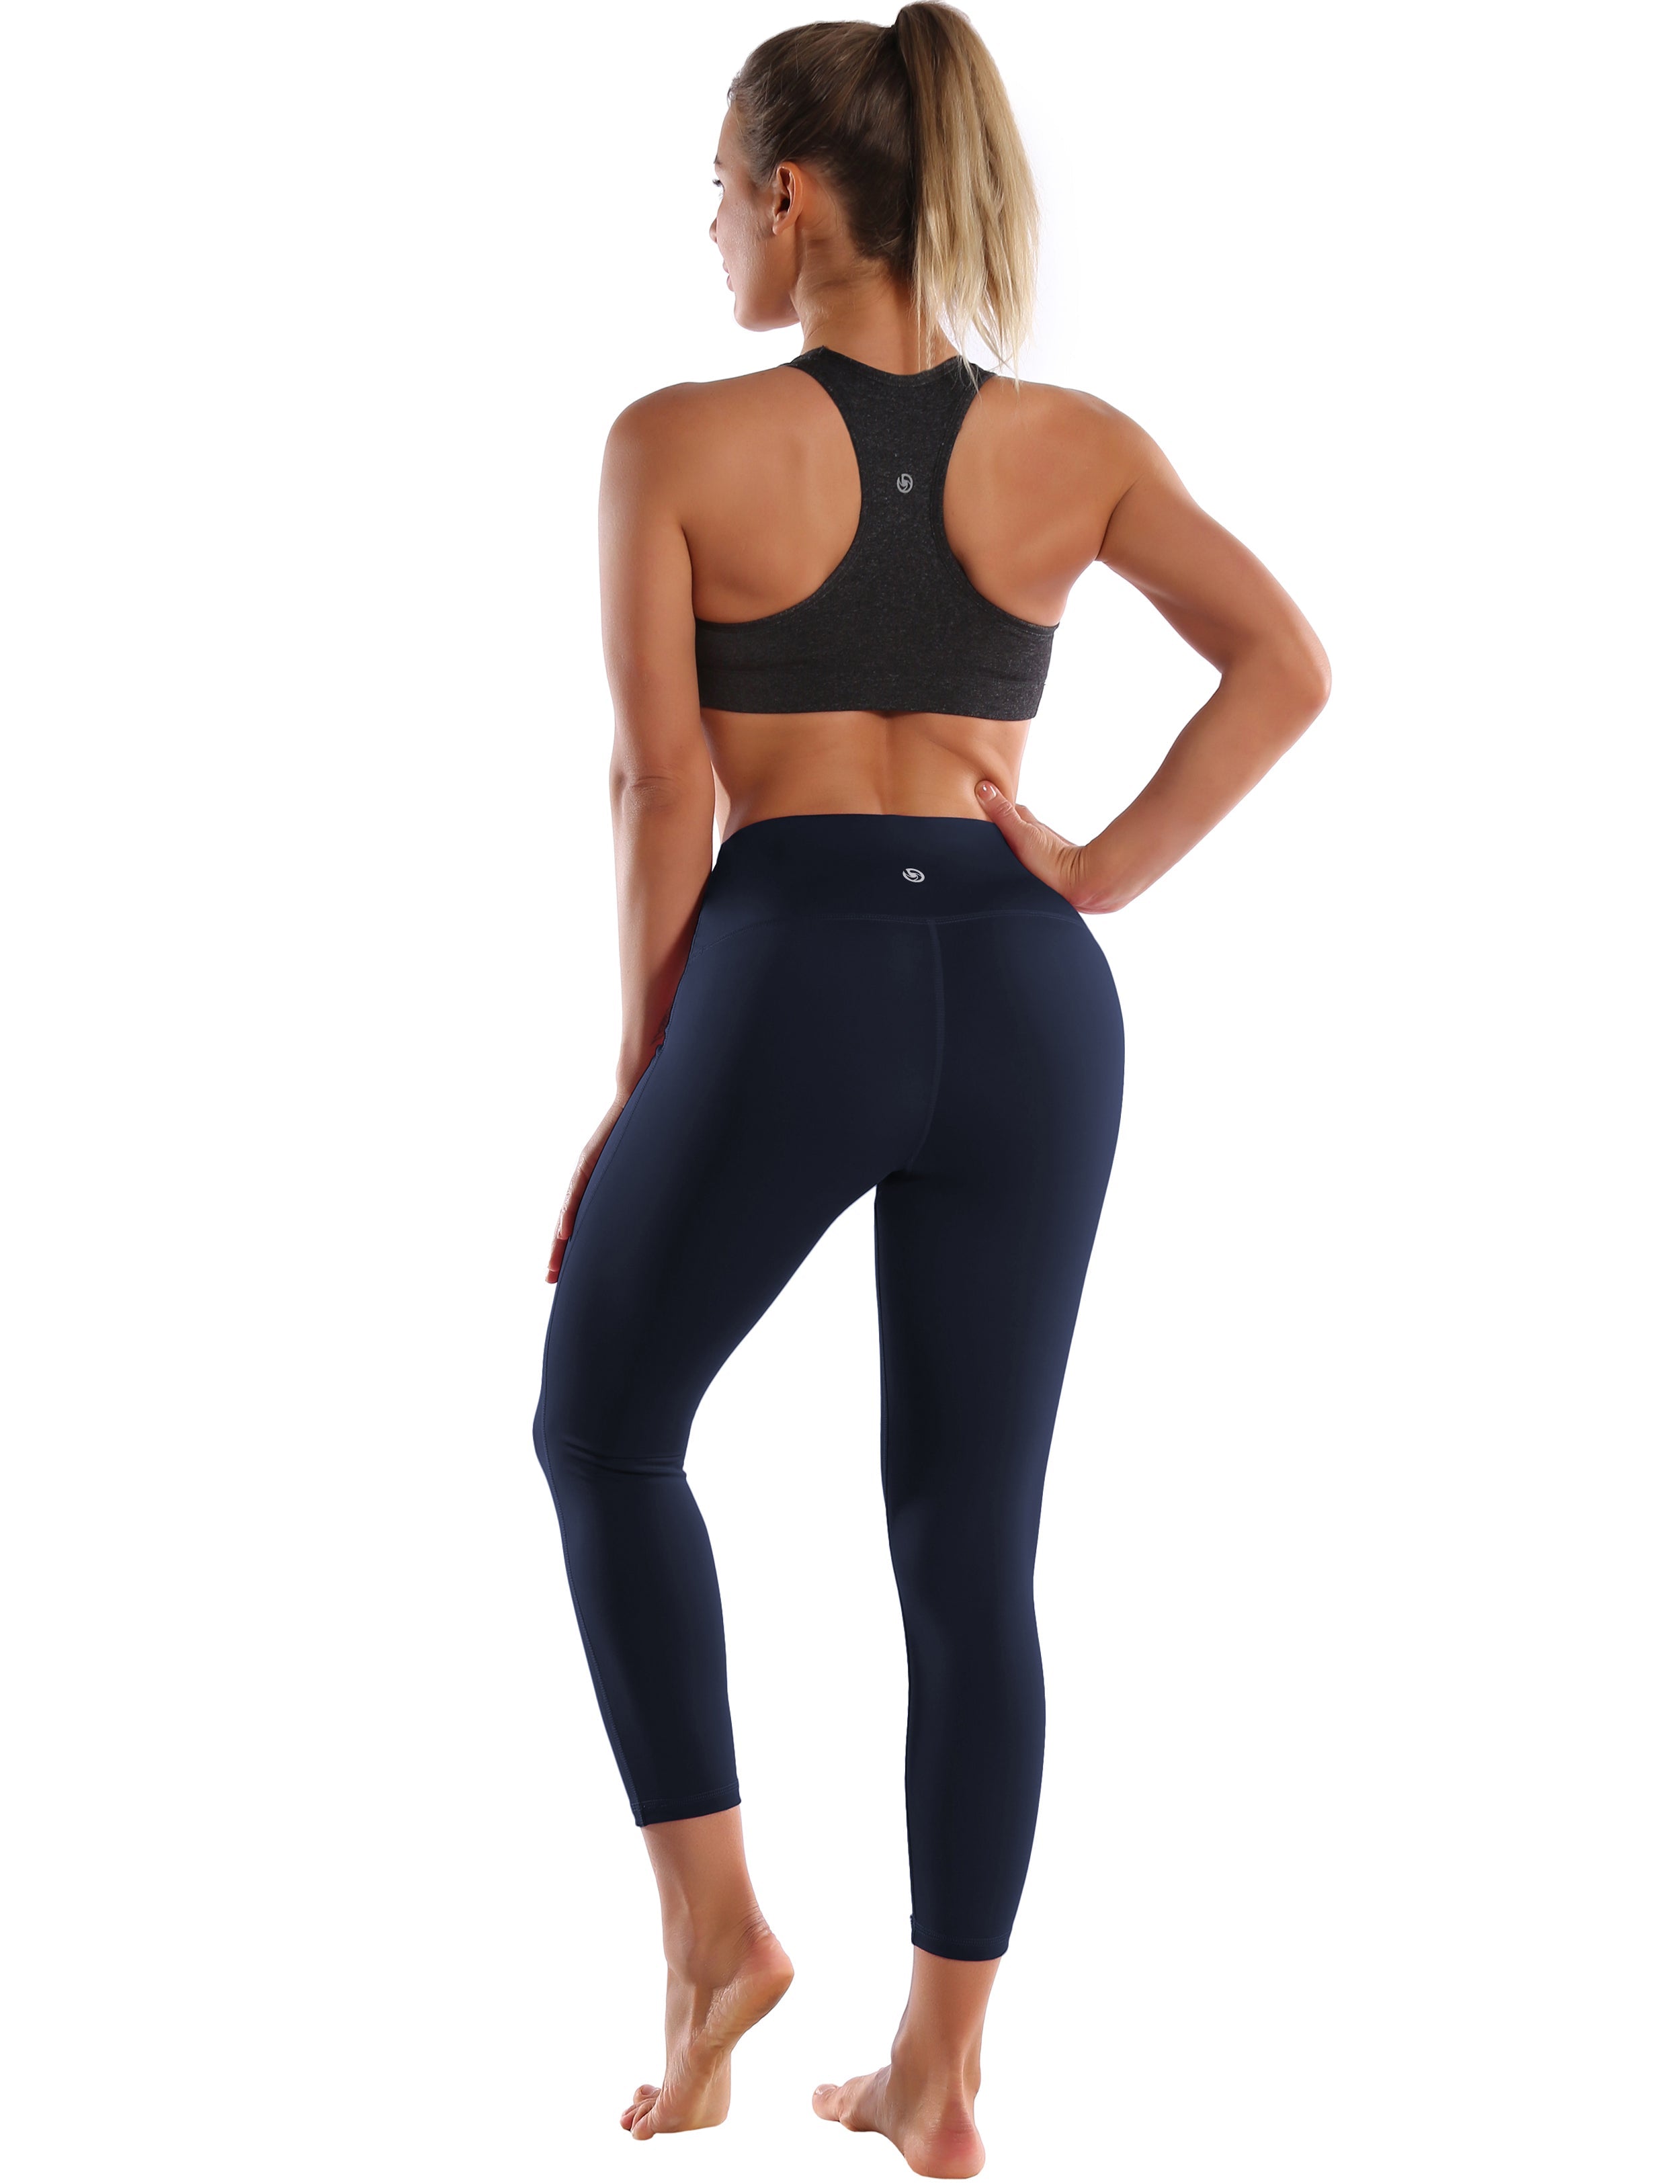 22" High Waist Side Line Capris darknavy 75%Nylon/25%Spandex Fabric doesn't attract lint easily 4-way stretch No see-through Moisture-wicking Tummy control Inner pocket